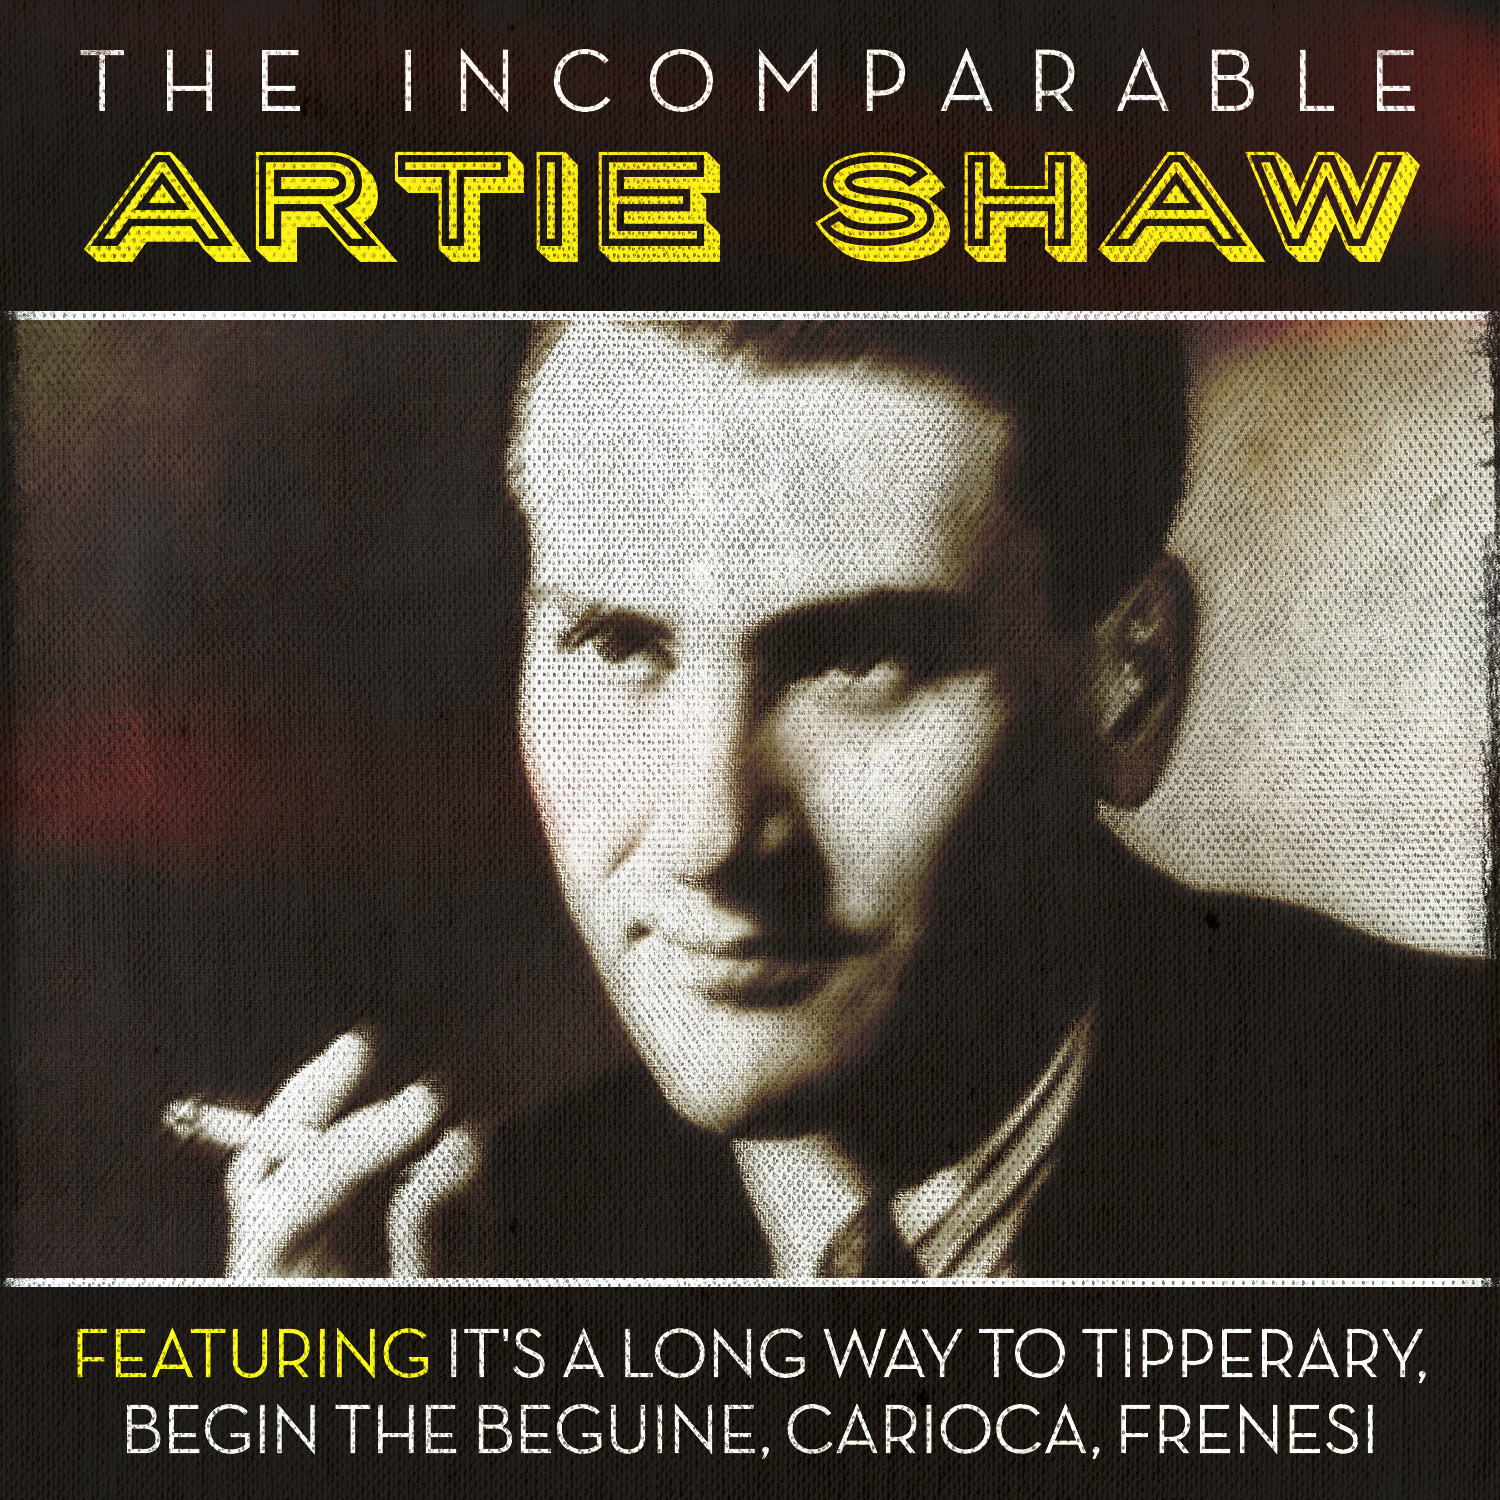 The Incomparable Artie Shaw